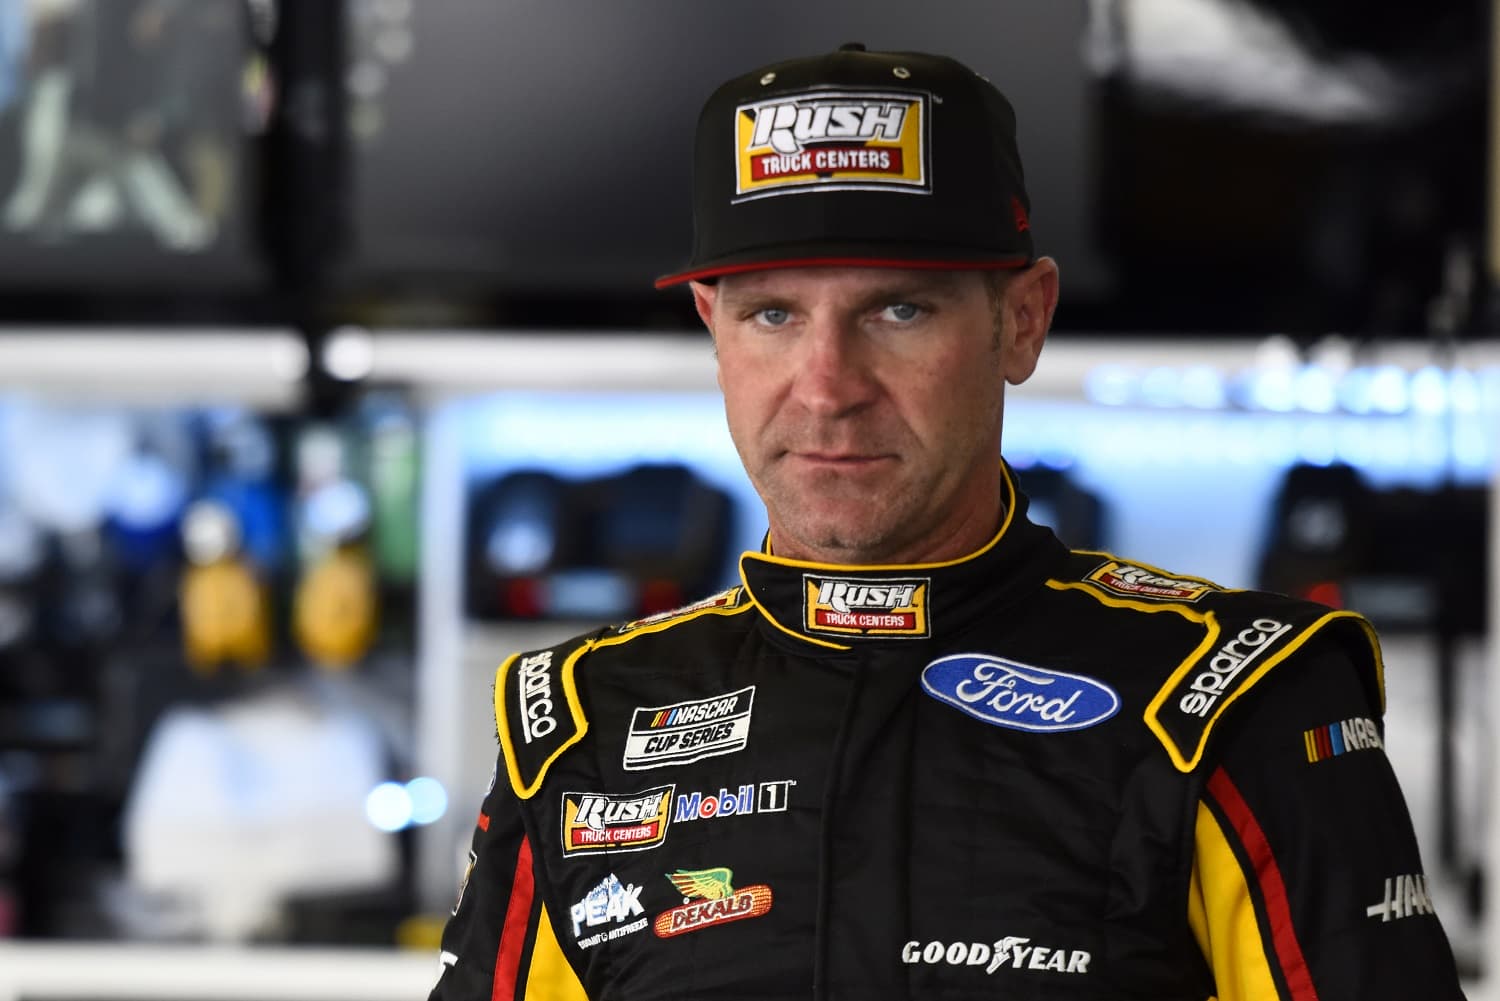 Clint Bowyer in the garage during practice for the Daytona 500 on Feb. 15, 2020. | Jared C. Tilton/Getty Images